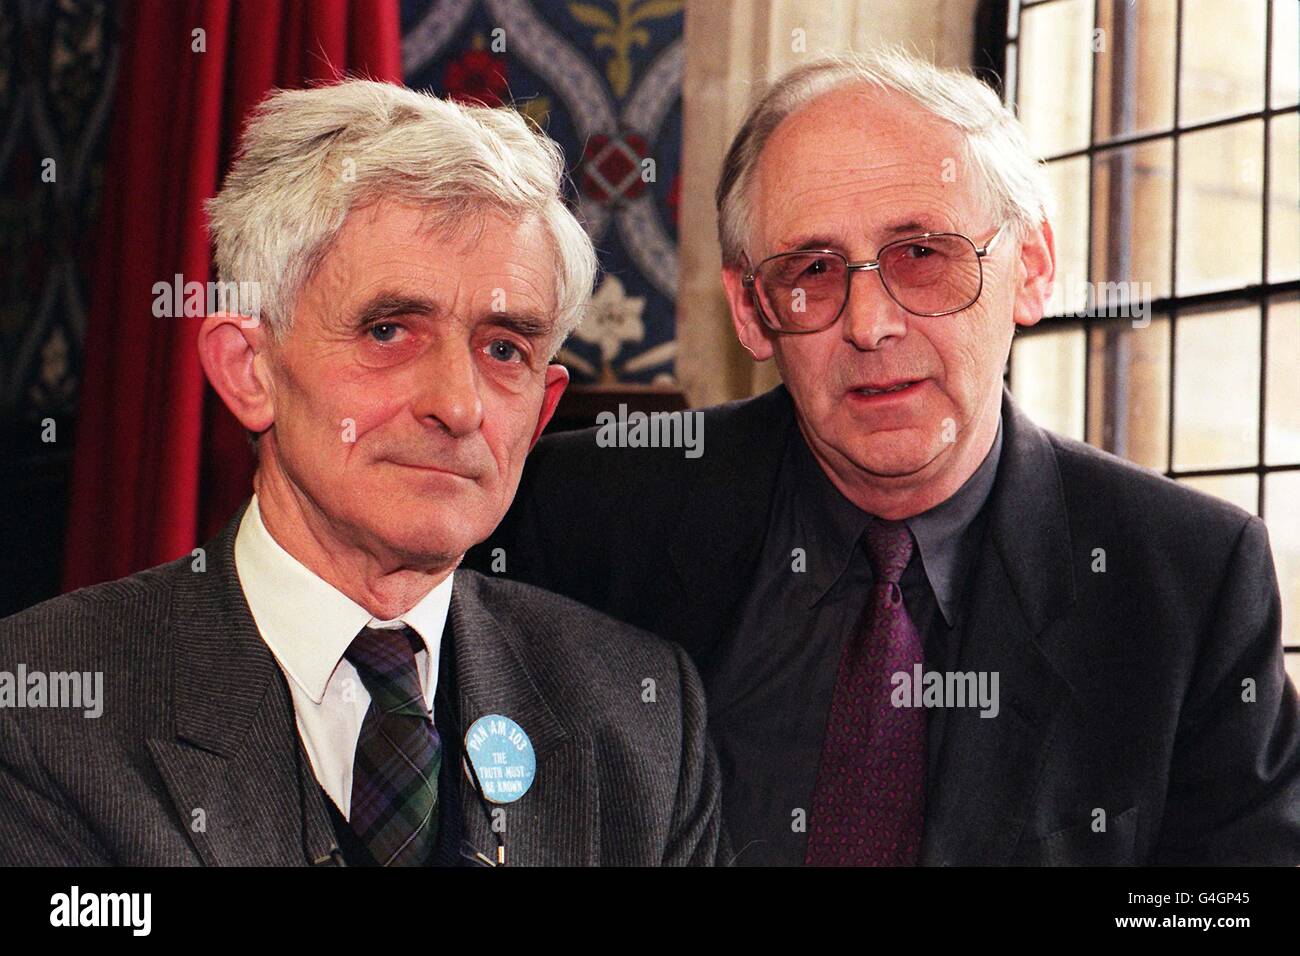 Dr Jim Swire (left), spokesman for UK Families Flight 103, in the Jubilee Room, at the House of Commons today (Monday) with Rev John Mosey, a pastor with the Assemblies of God church, whose daughter Helga died in the Lockerbie bombing ten years ago today. Campaigners, including relatives of the 270 victims from the explosion on December 21, 1988, said they were hopeful that Colonel Gaddafi's regime would not see the Anglo-American bombing of Iraq as reason to resist handing over the two Libyans accused of the bombing. AIR Lockerbie. Photo by Fiona Hanson. Stock Photo